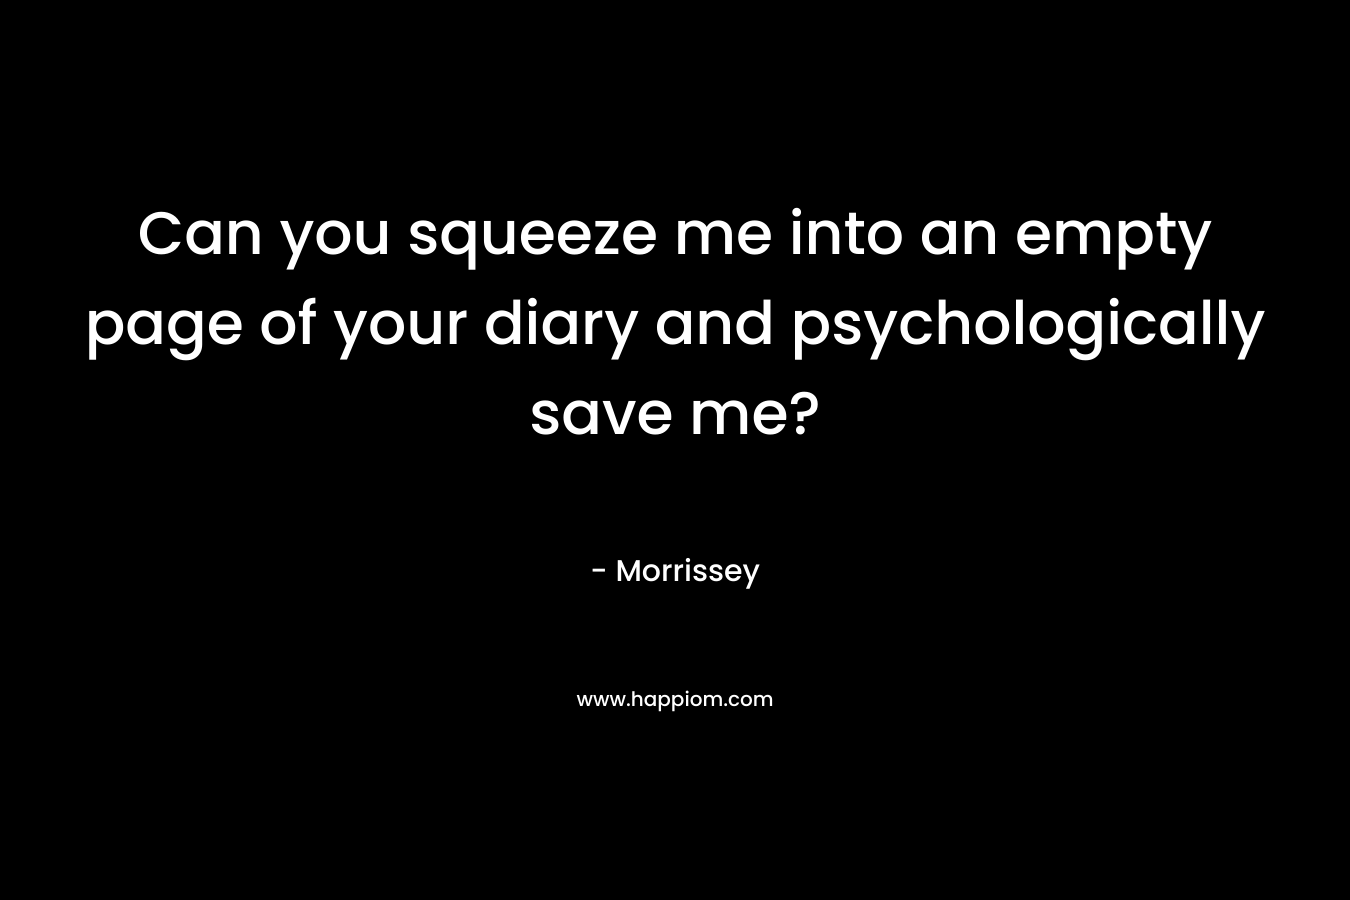 Can you squeeze me into an empty page of your diary and psychologically save me? – Morrissey